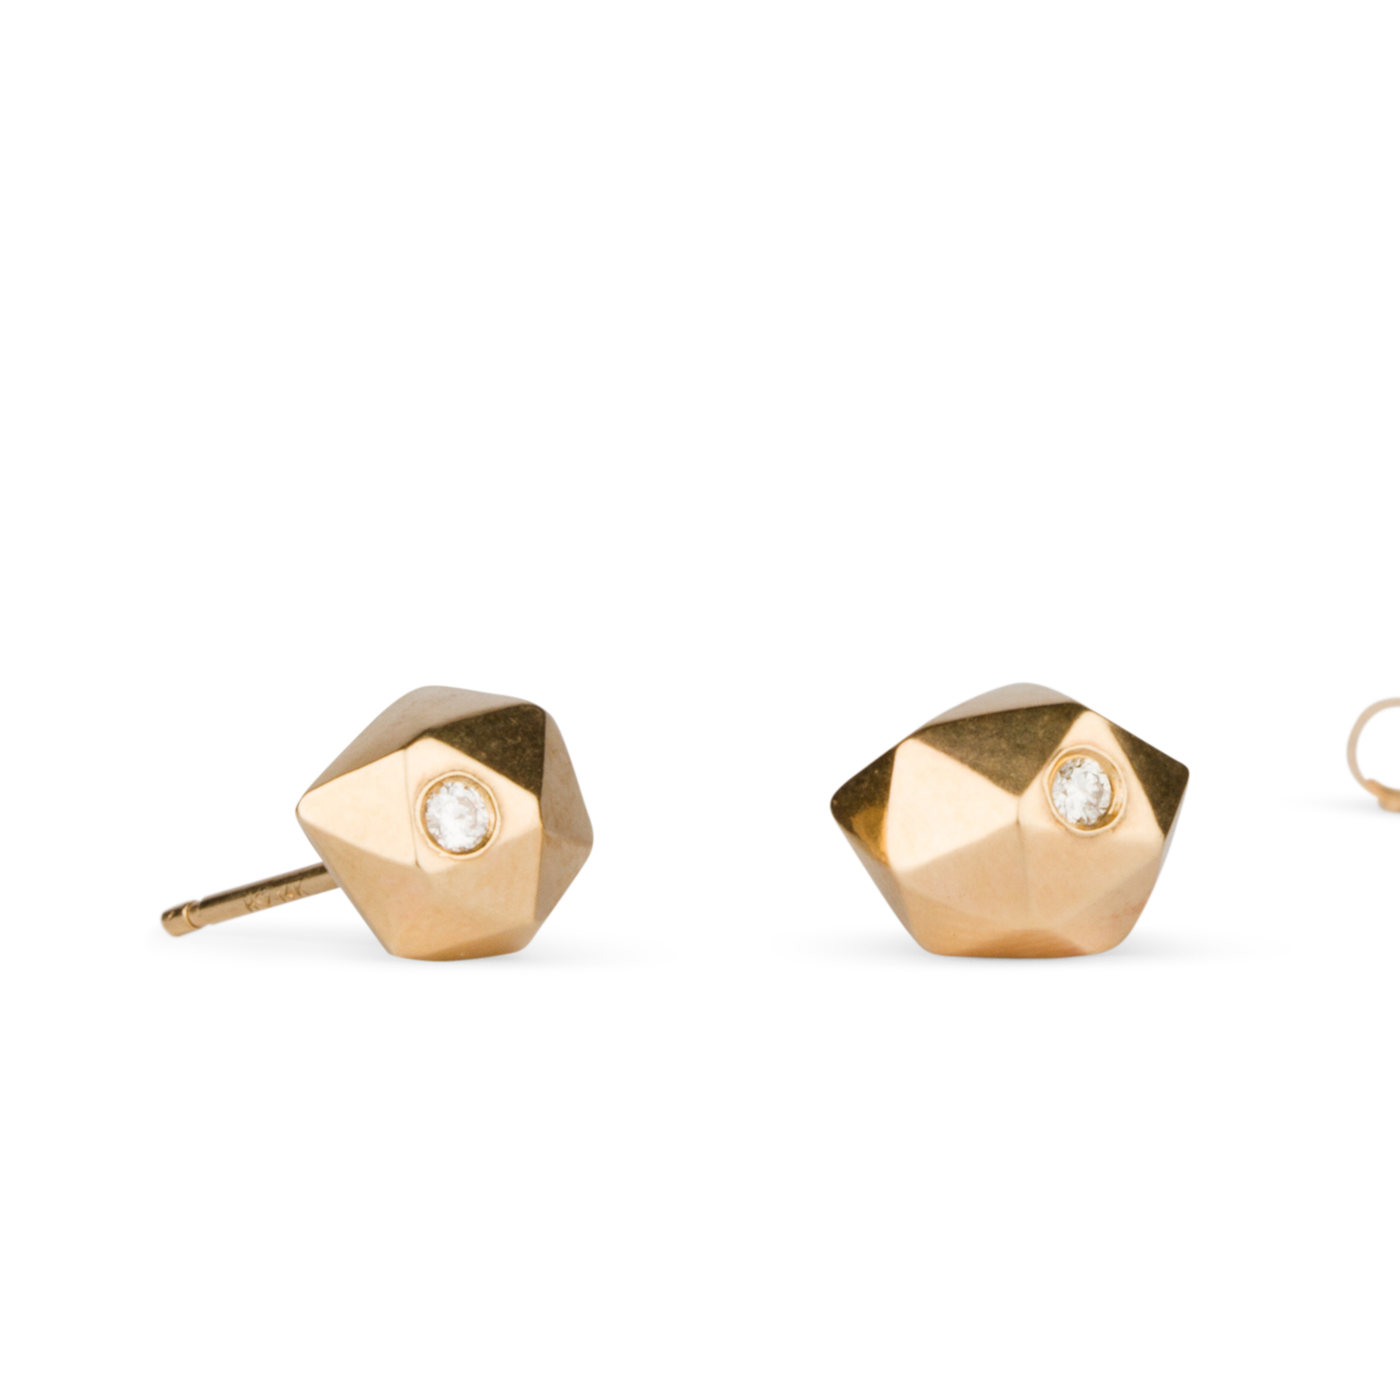 Geometric faceted gold wabi-sabi stud earrings with white diamonds in 14k yellow gold side view on a white background by Corey Egan